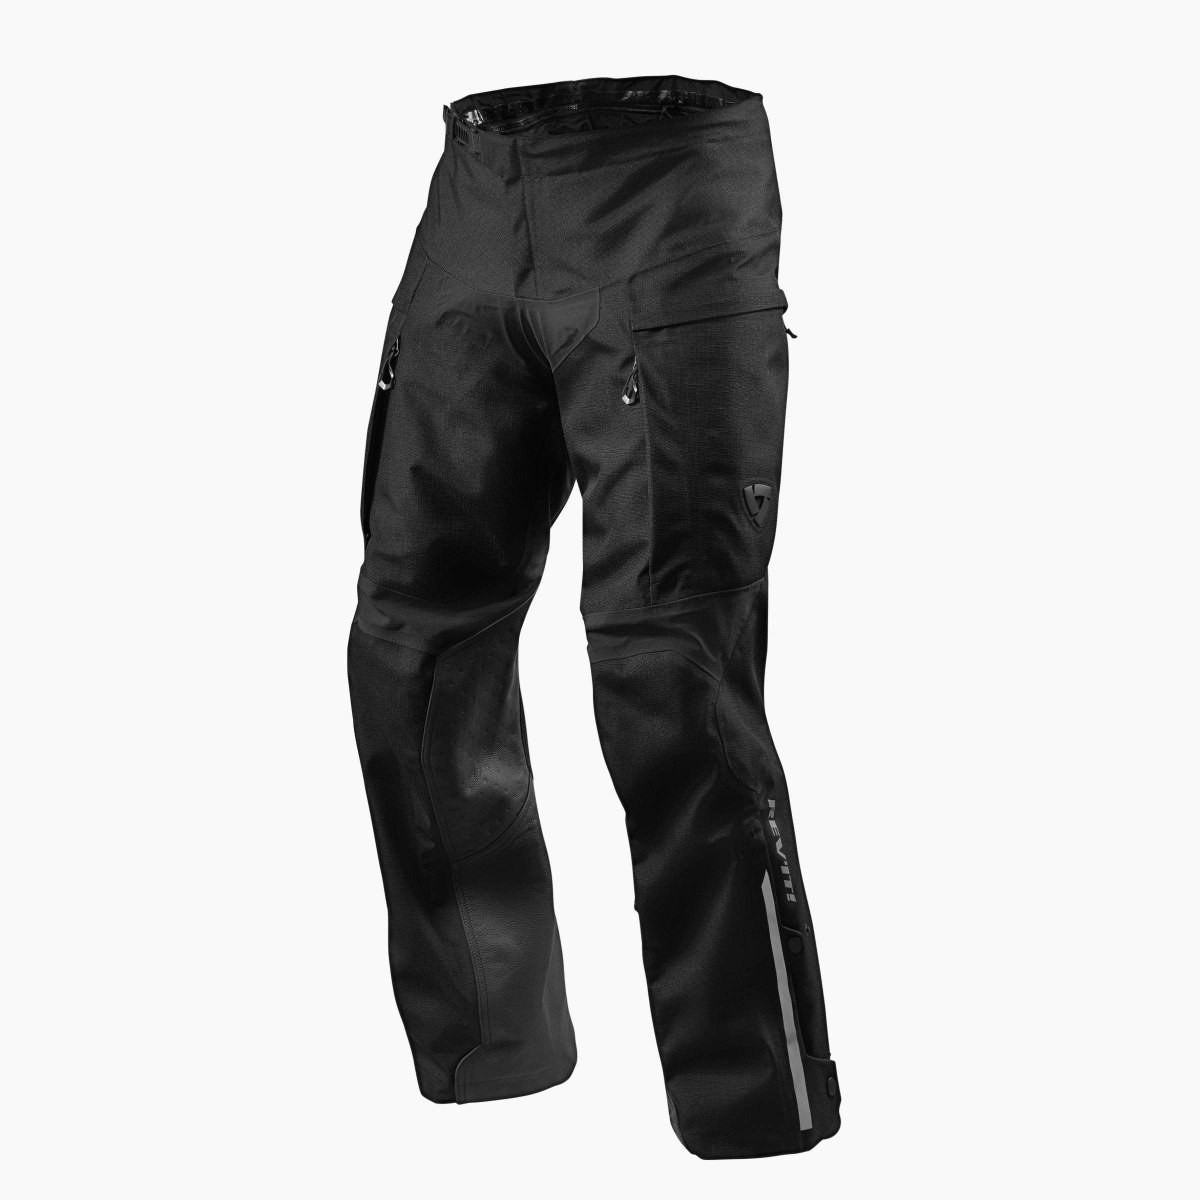 Image of REV'IT! Component H2O Standard Black Motorcycle Pants Talla L